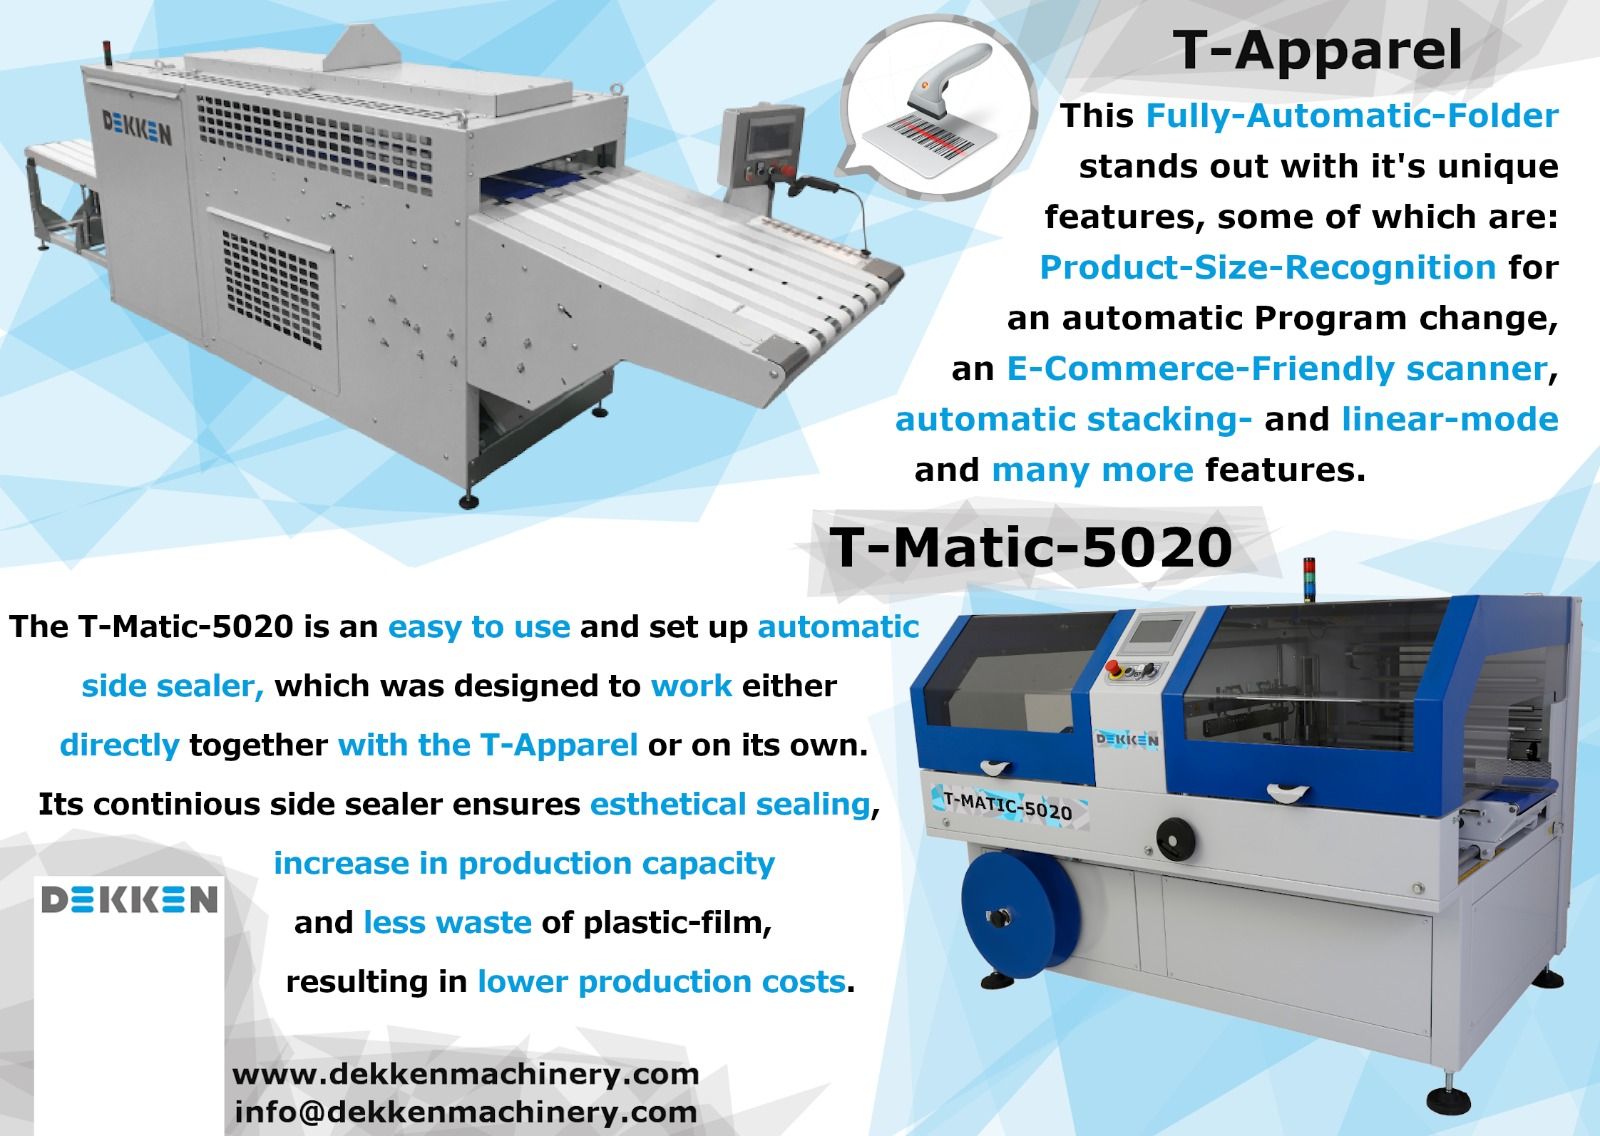 Our multifunctional T-Apparel ft. T-Matic-5020